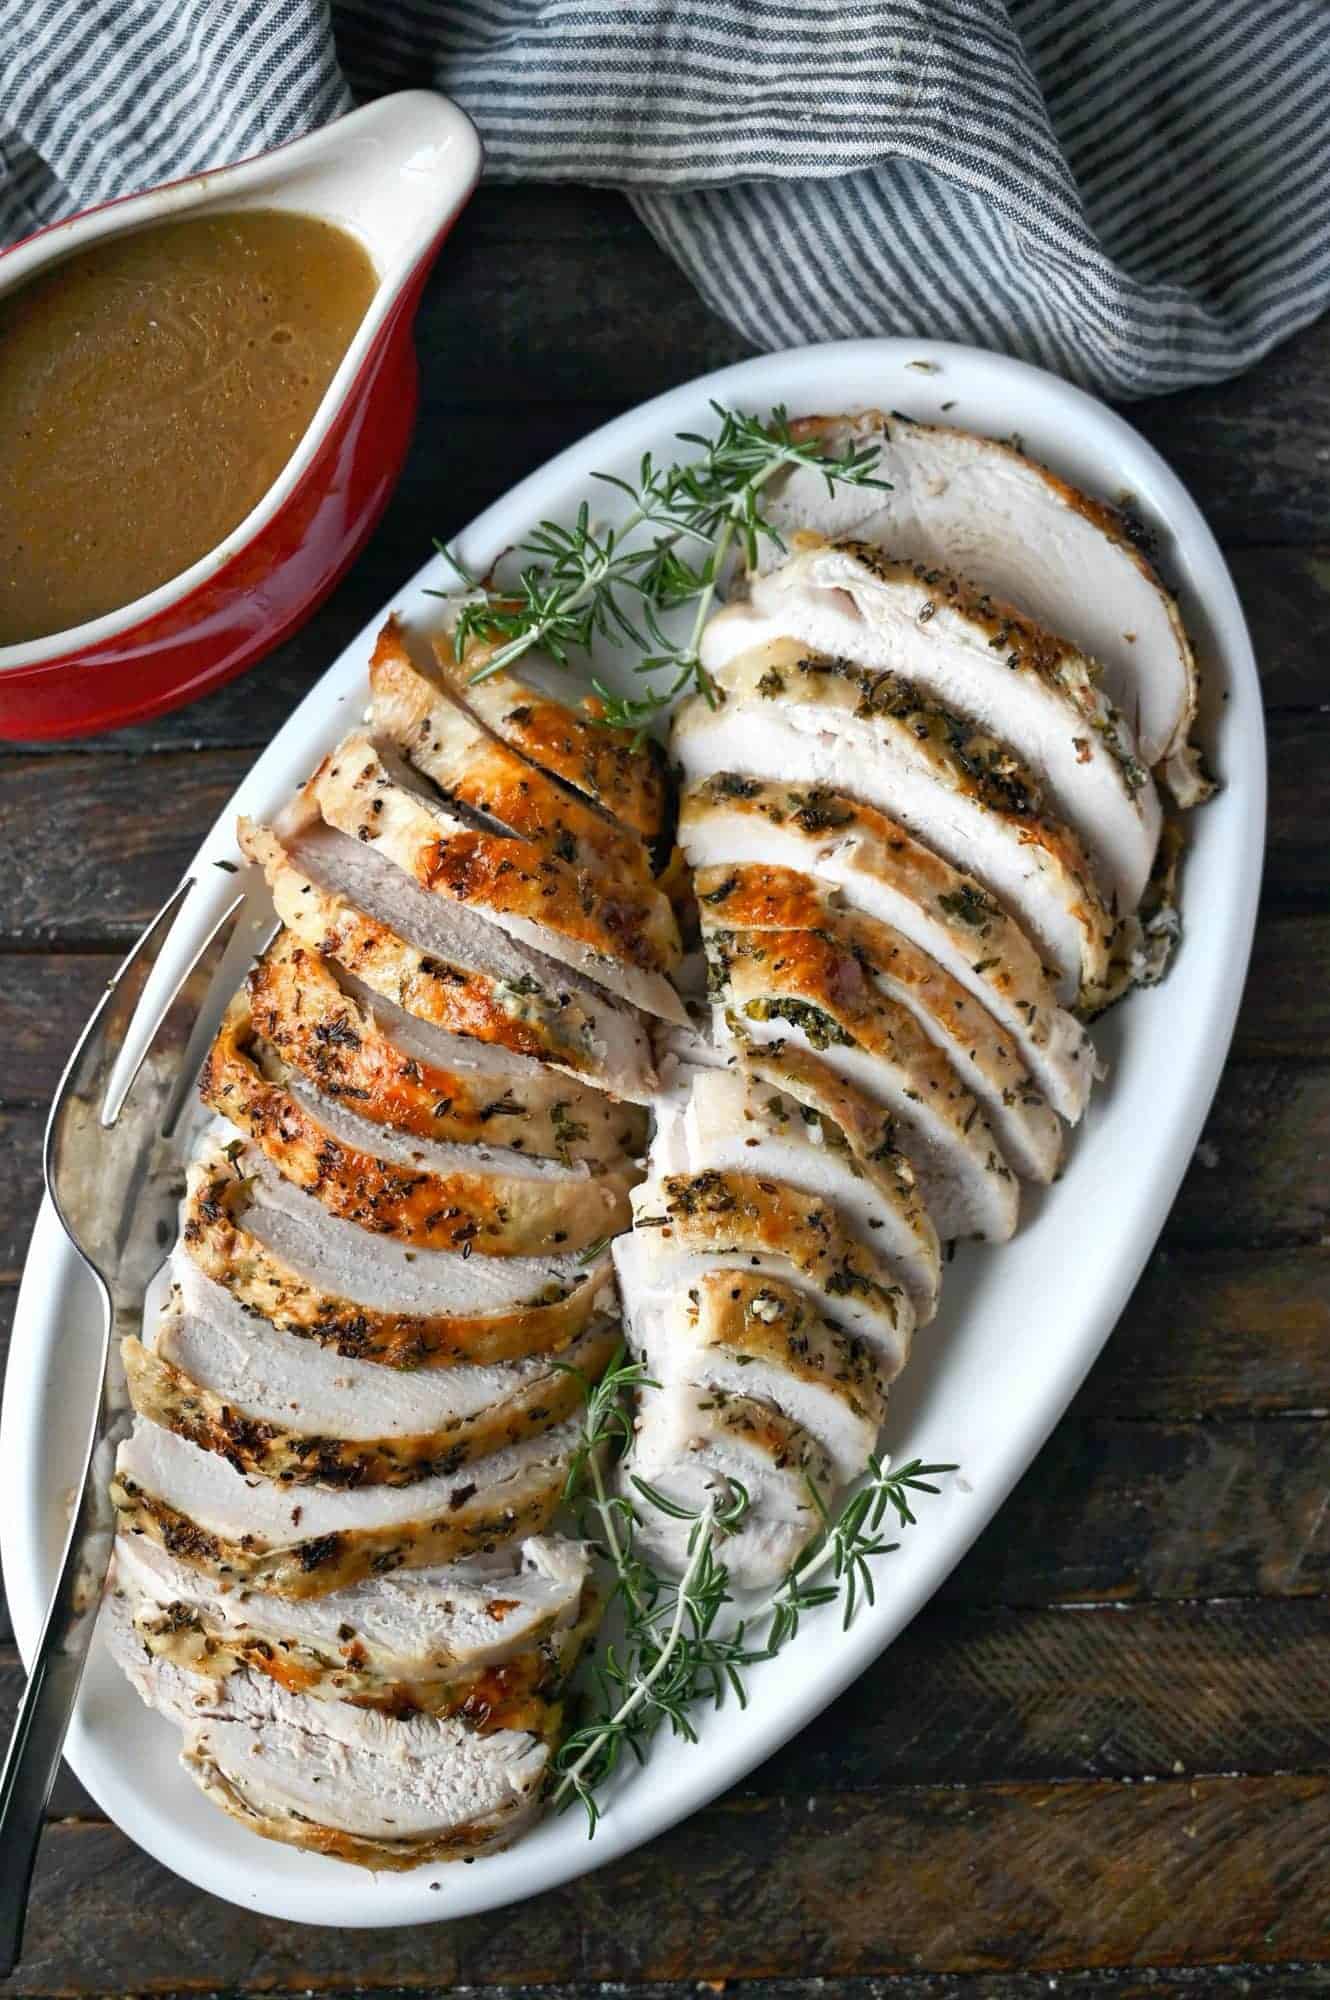 Two turkey breats thinly sliced on a white platter with rosemary sprigs.